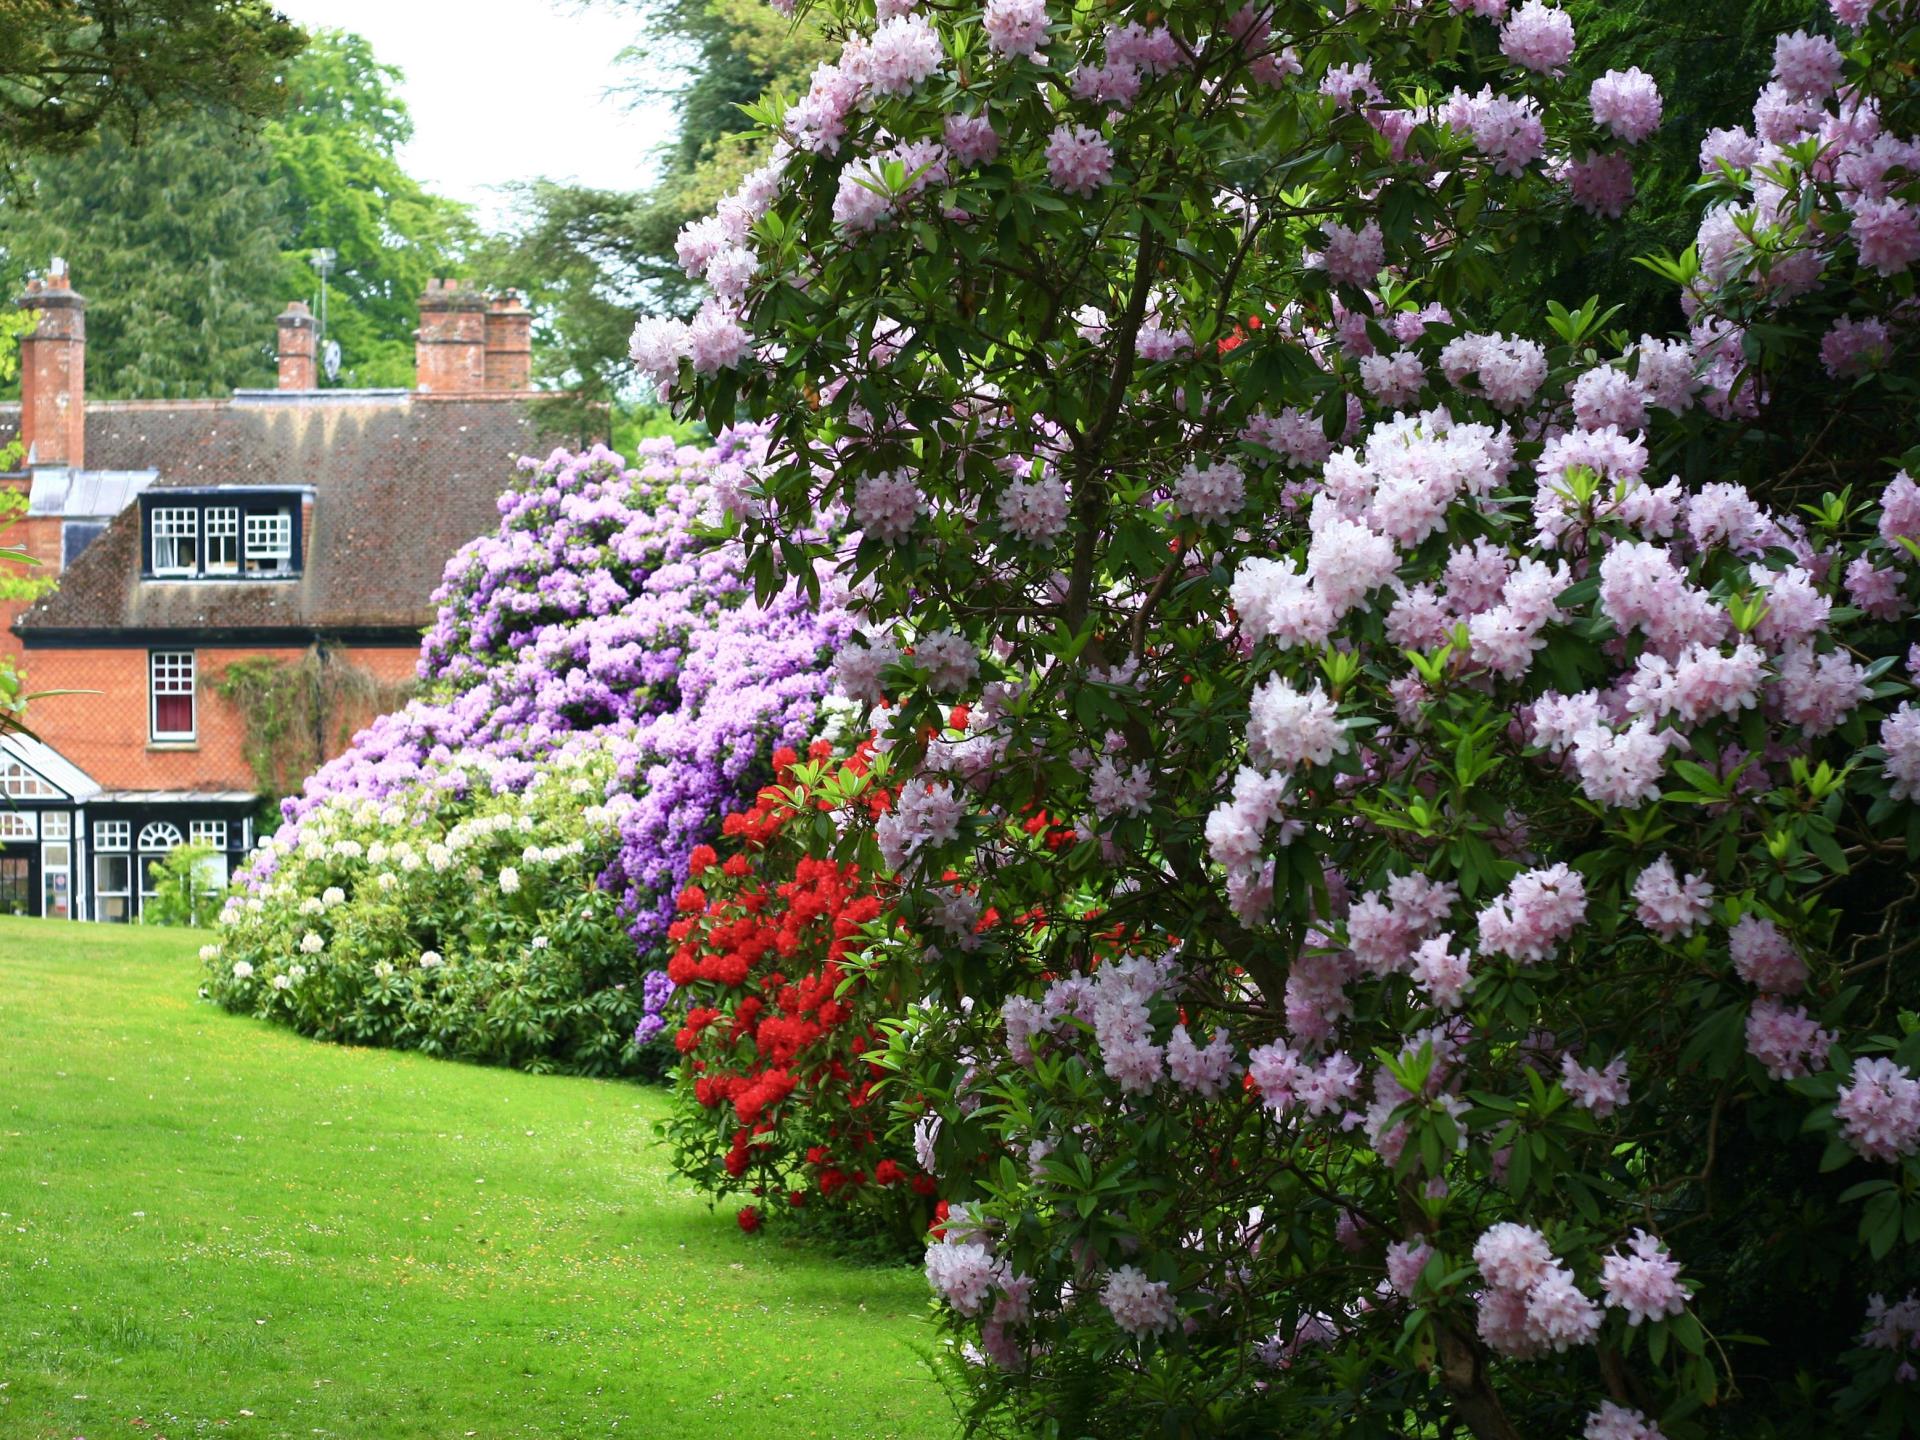 Stunning Rhododendrons!